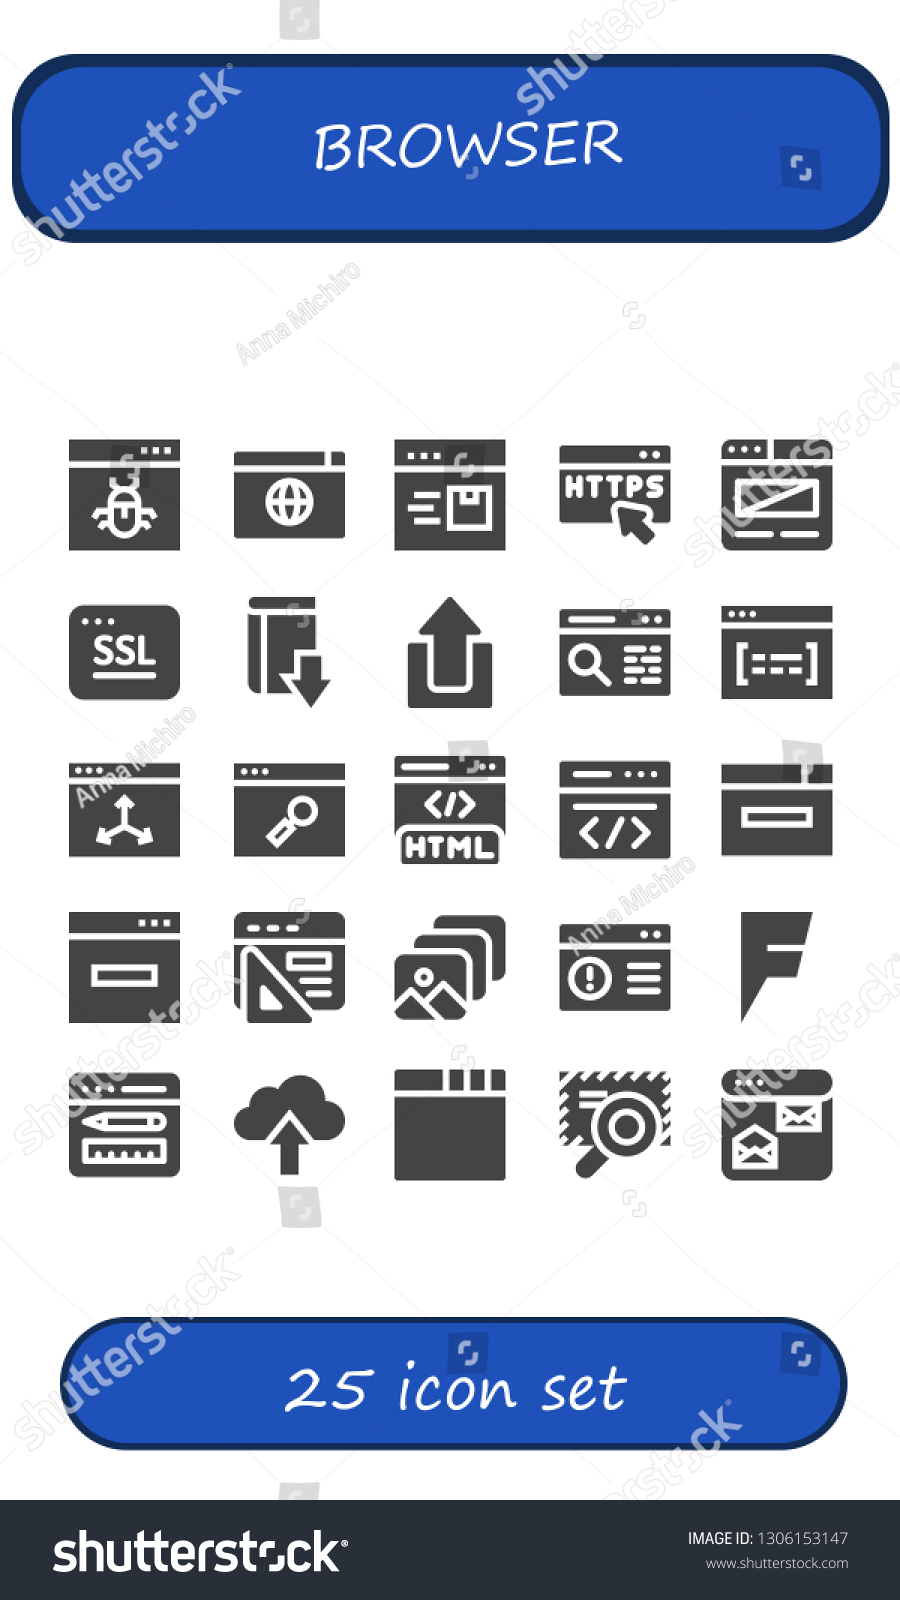 Browser Icon Set Filled Browser Icons Royalty Free Stock Vector Avopix Com